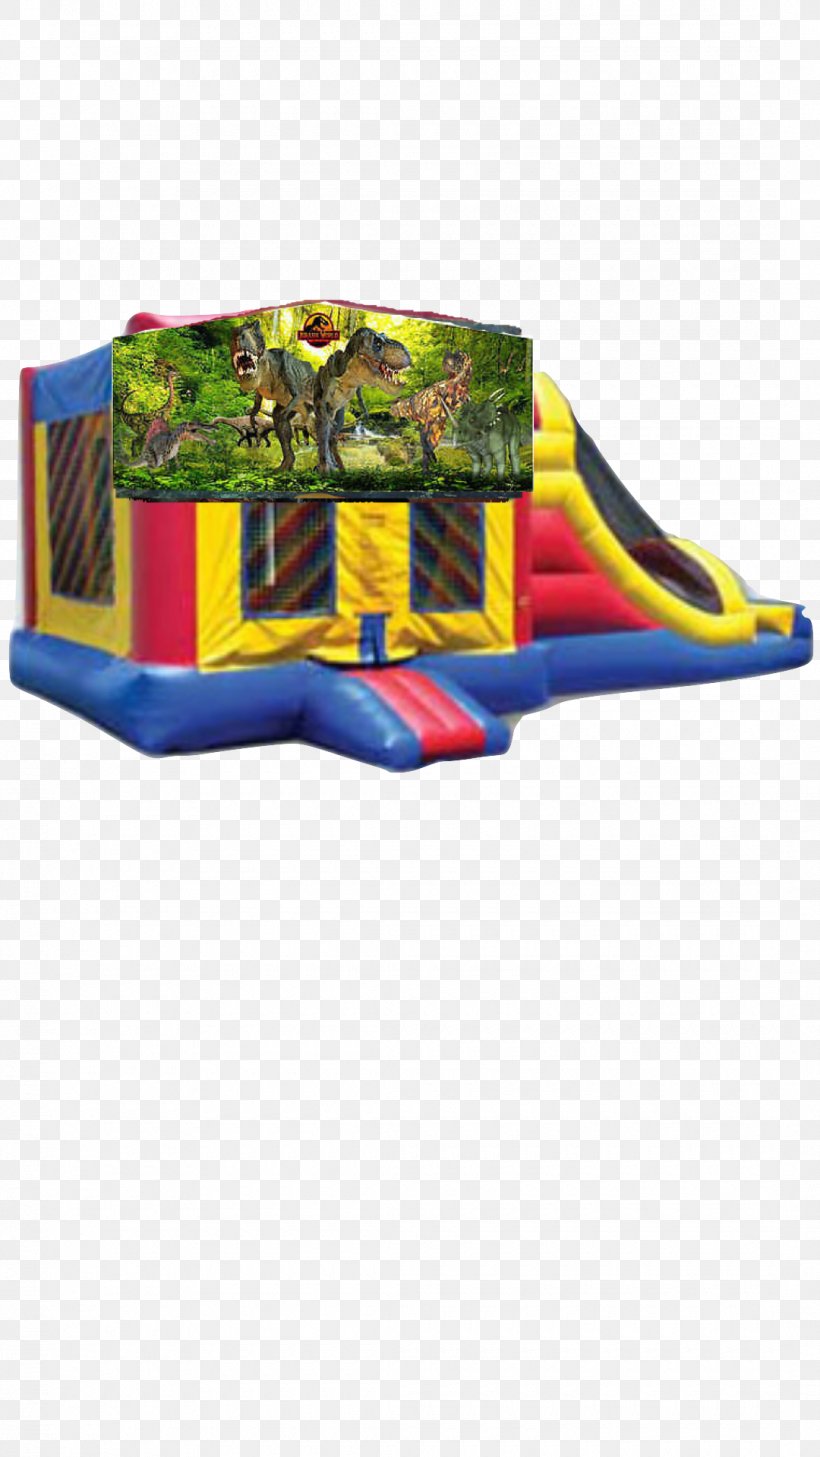 Inflatable Bouncers Playground Slide Renting Water Slide, PNG, 1080x1920px, Inflatable, Game, Games, Inflatable Bouncers, Outdoor Play Equipment Download Free